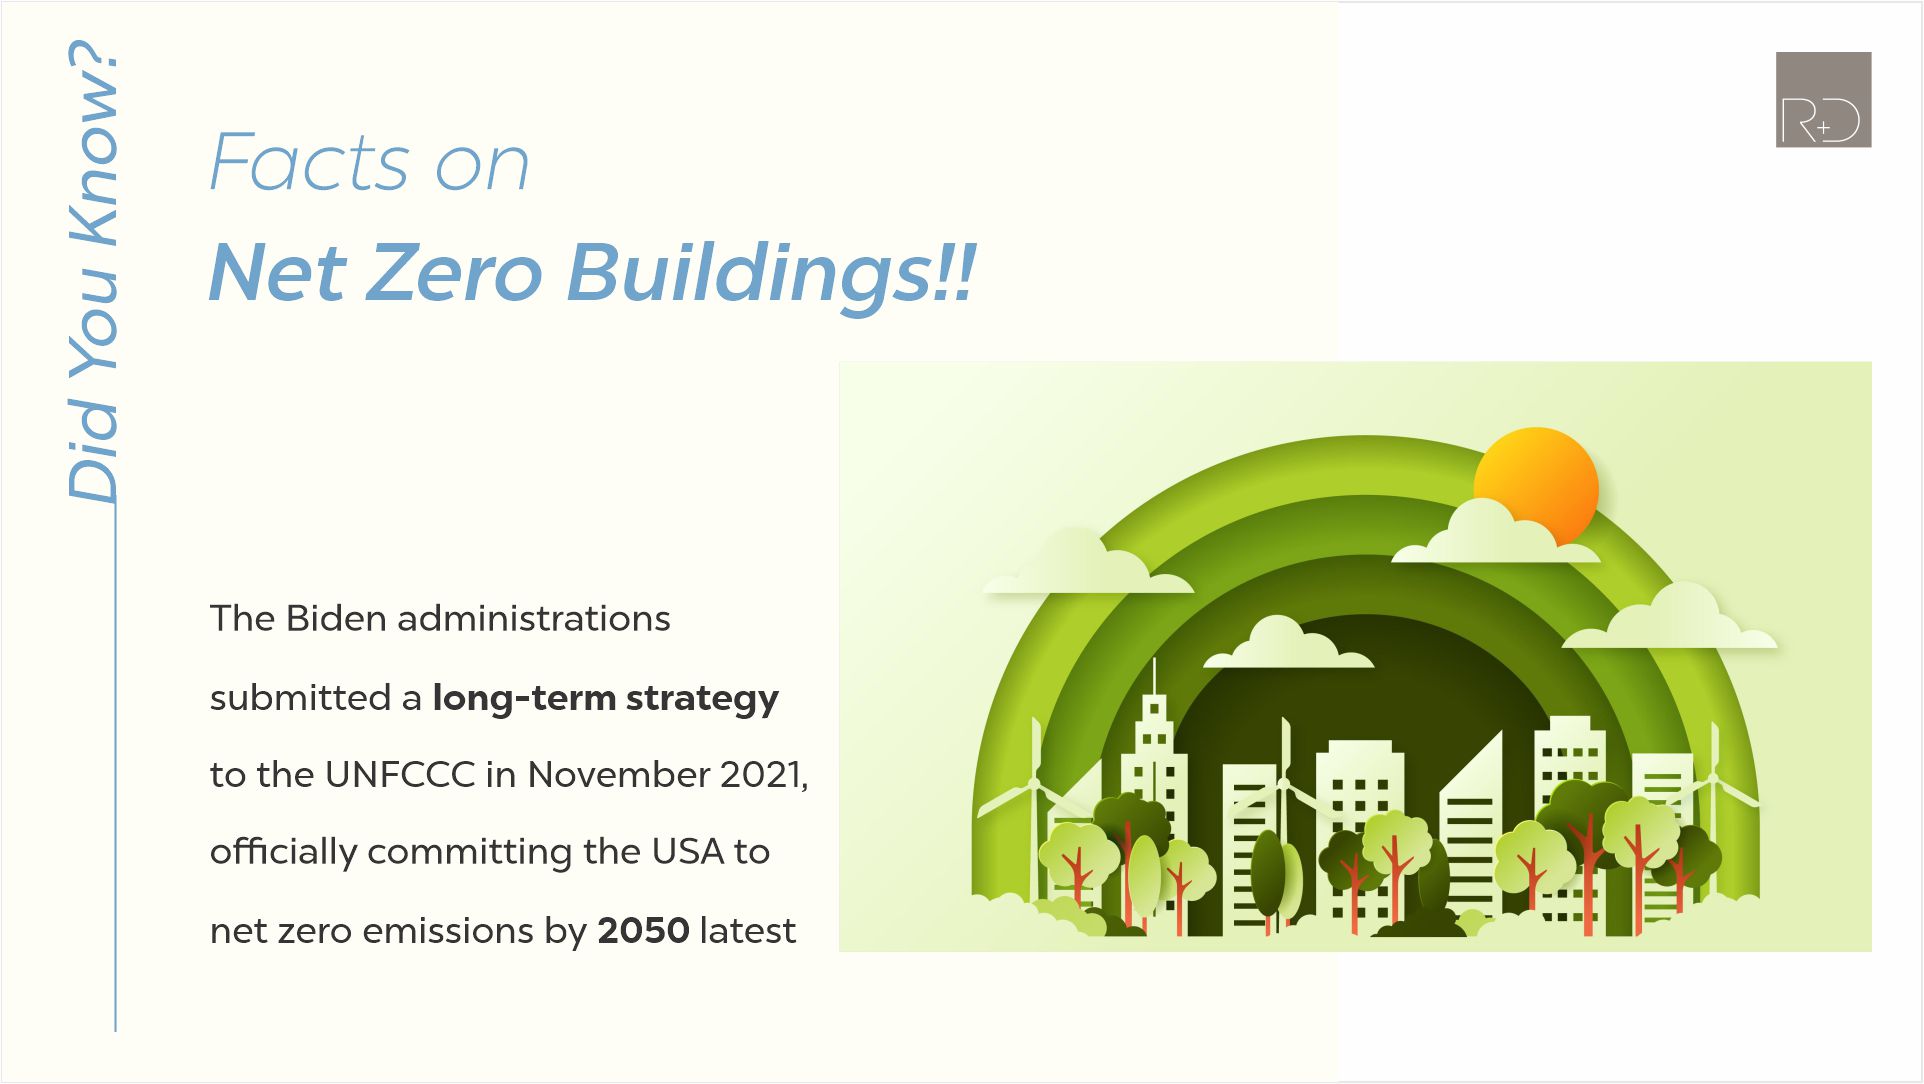 AEC facts by Russell and Dawson - Net Zero Buildings